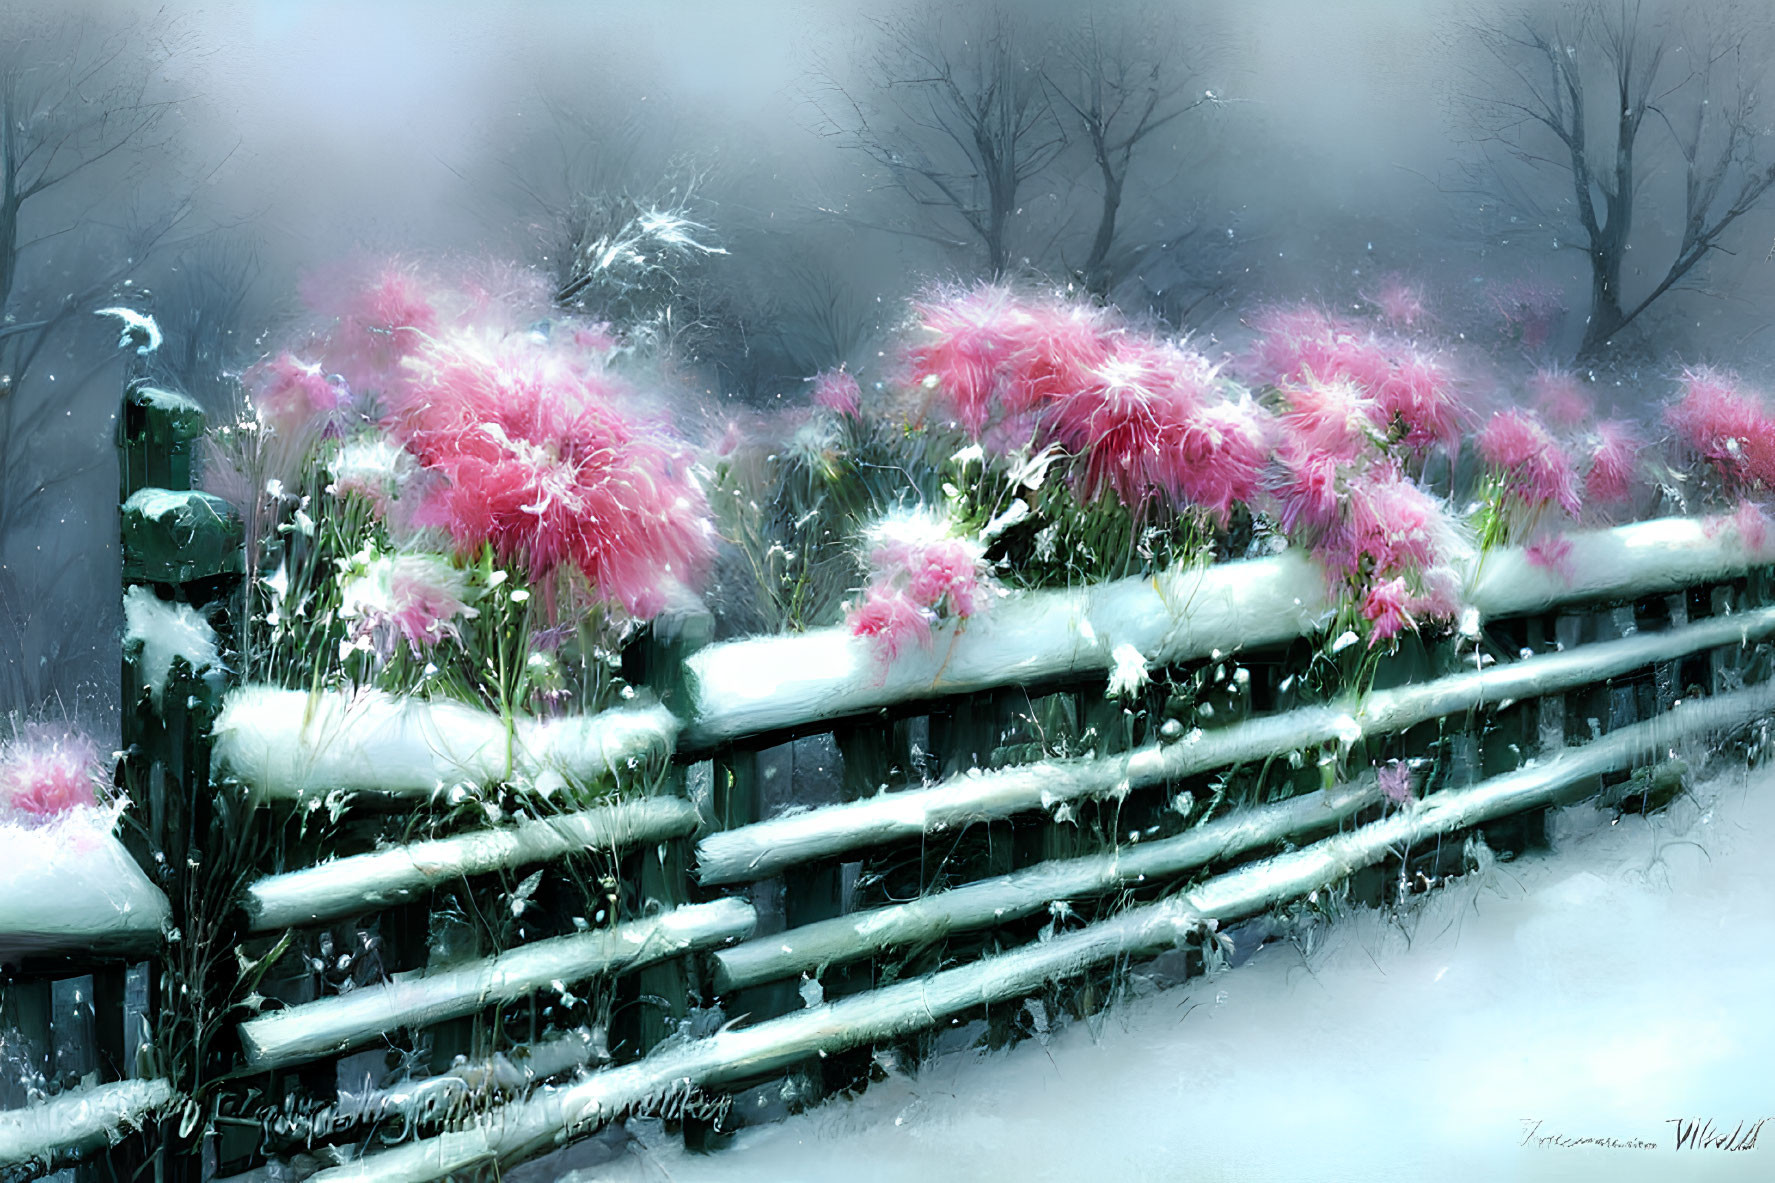 Snowy scene with pink flowers on wooden fence in soft-focus winter setting